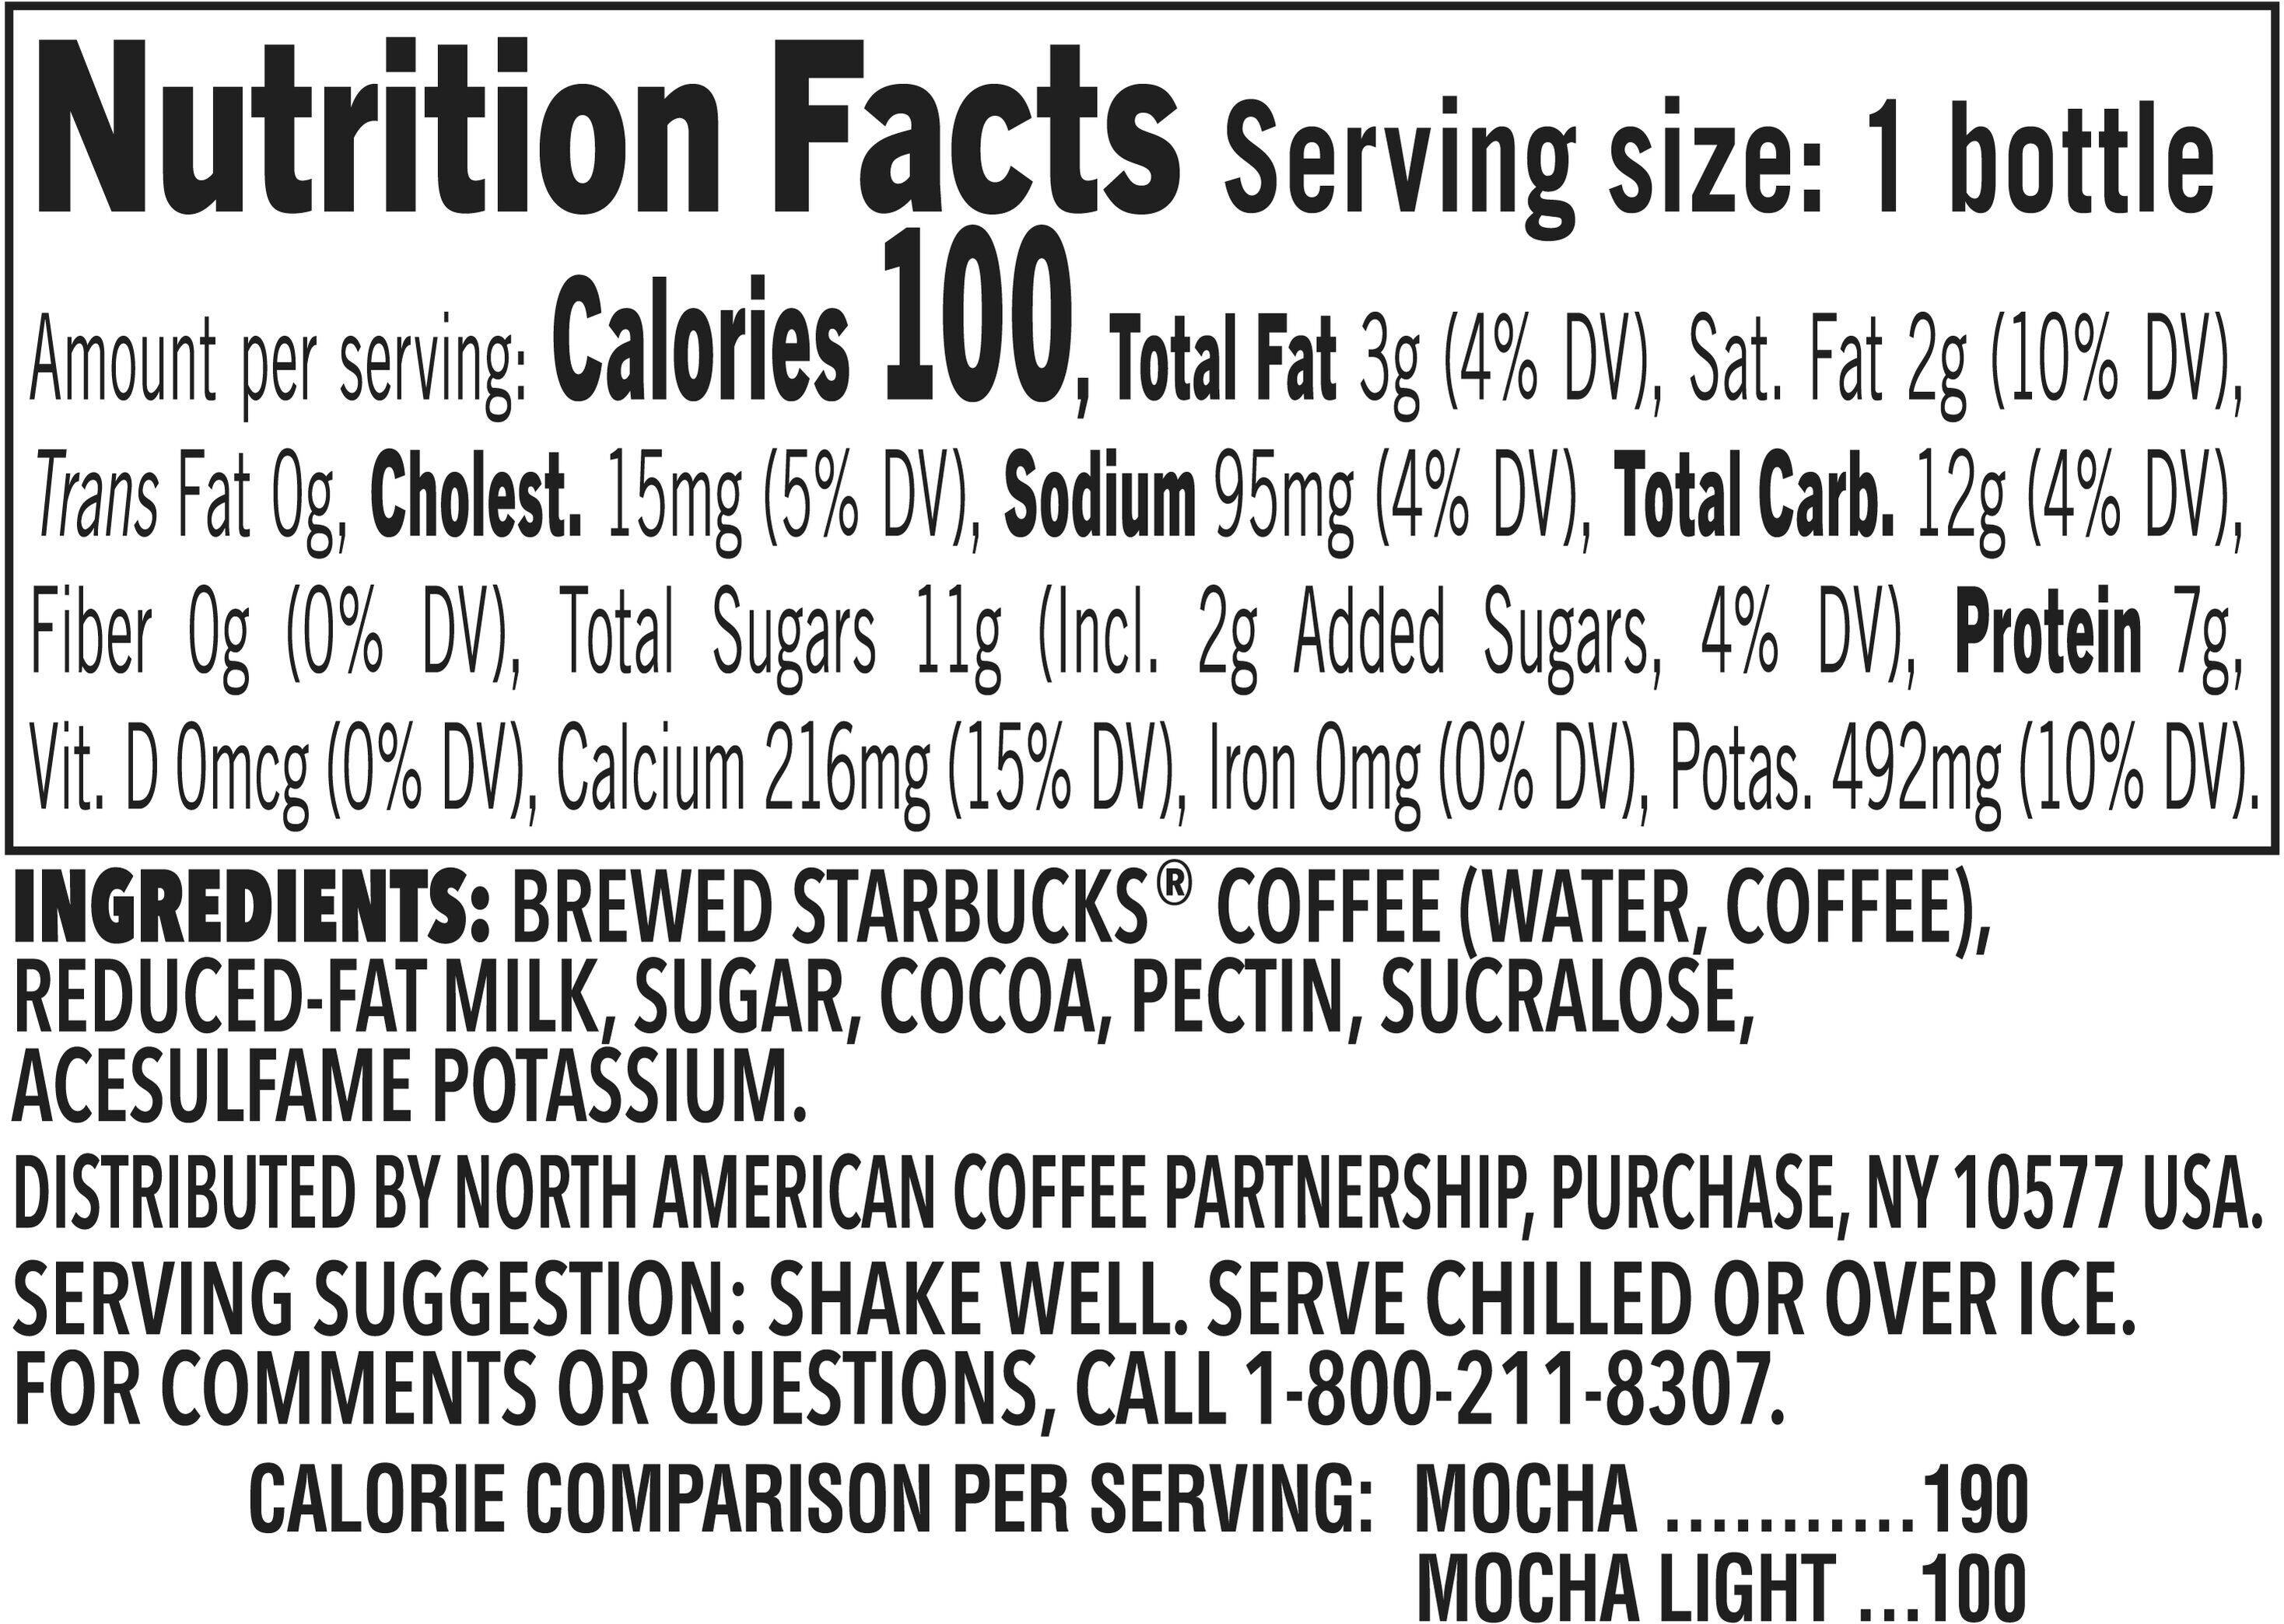 Image describing nutrition information for product Frappuccino Mocha Light